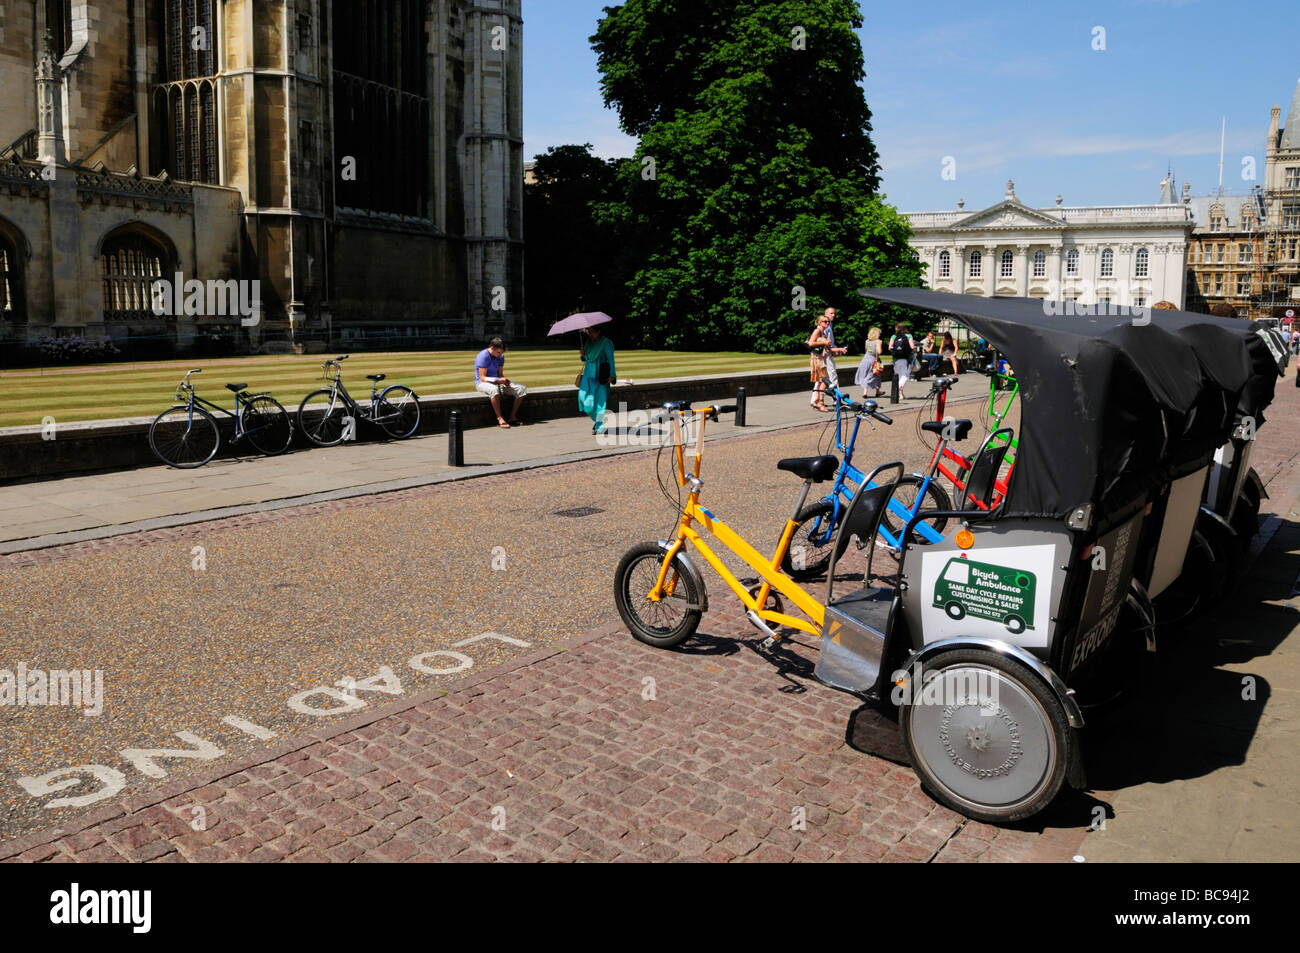 A rank of pedicabs cycle rickshaws available for hire by tourists outside Kings College, Cambridge England Uk Stock Photo